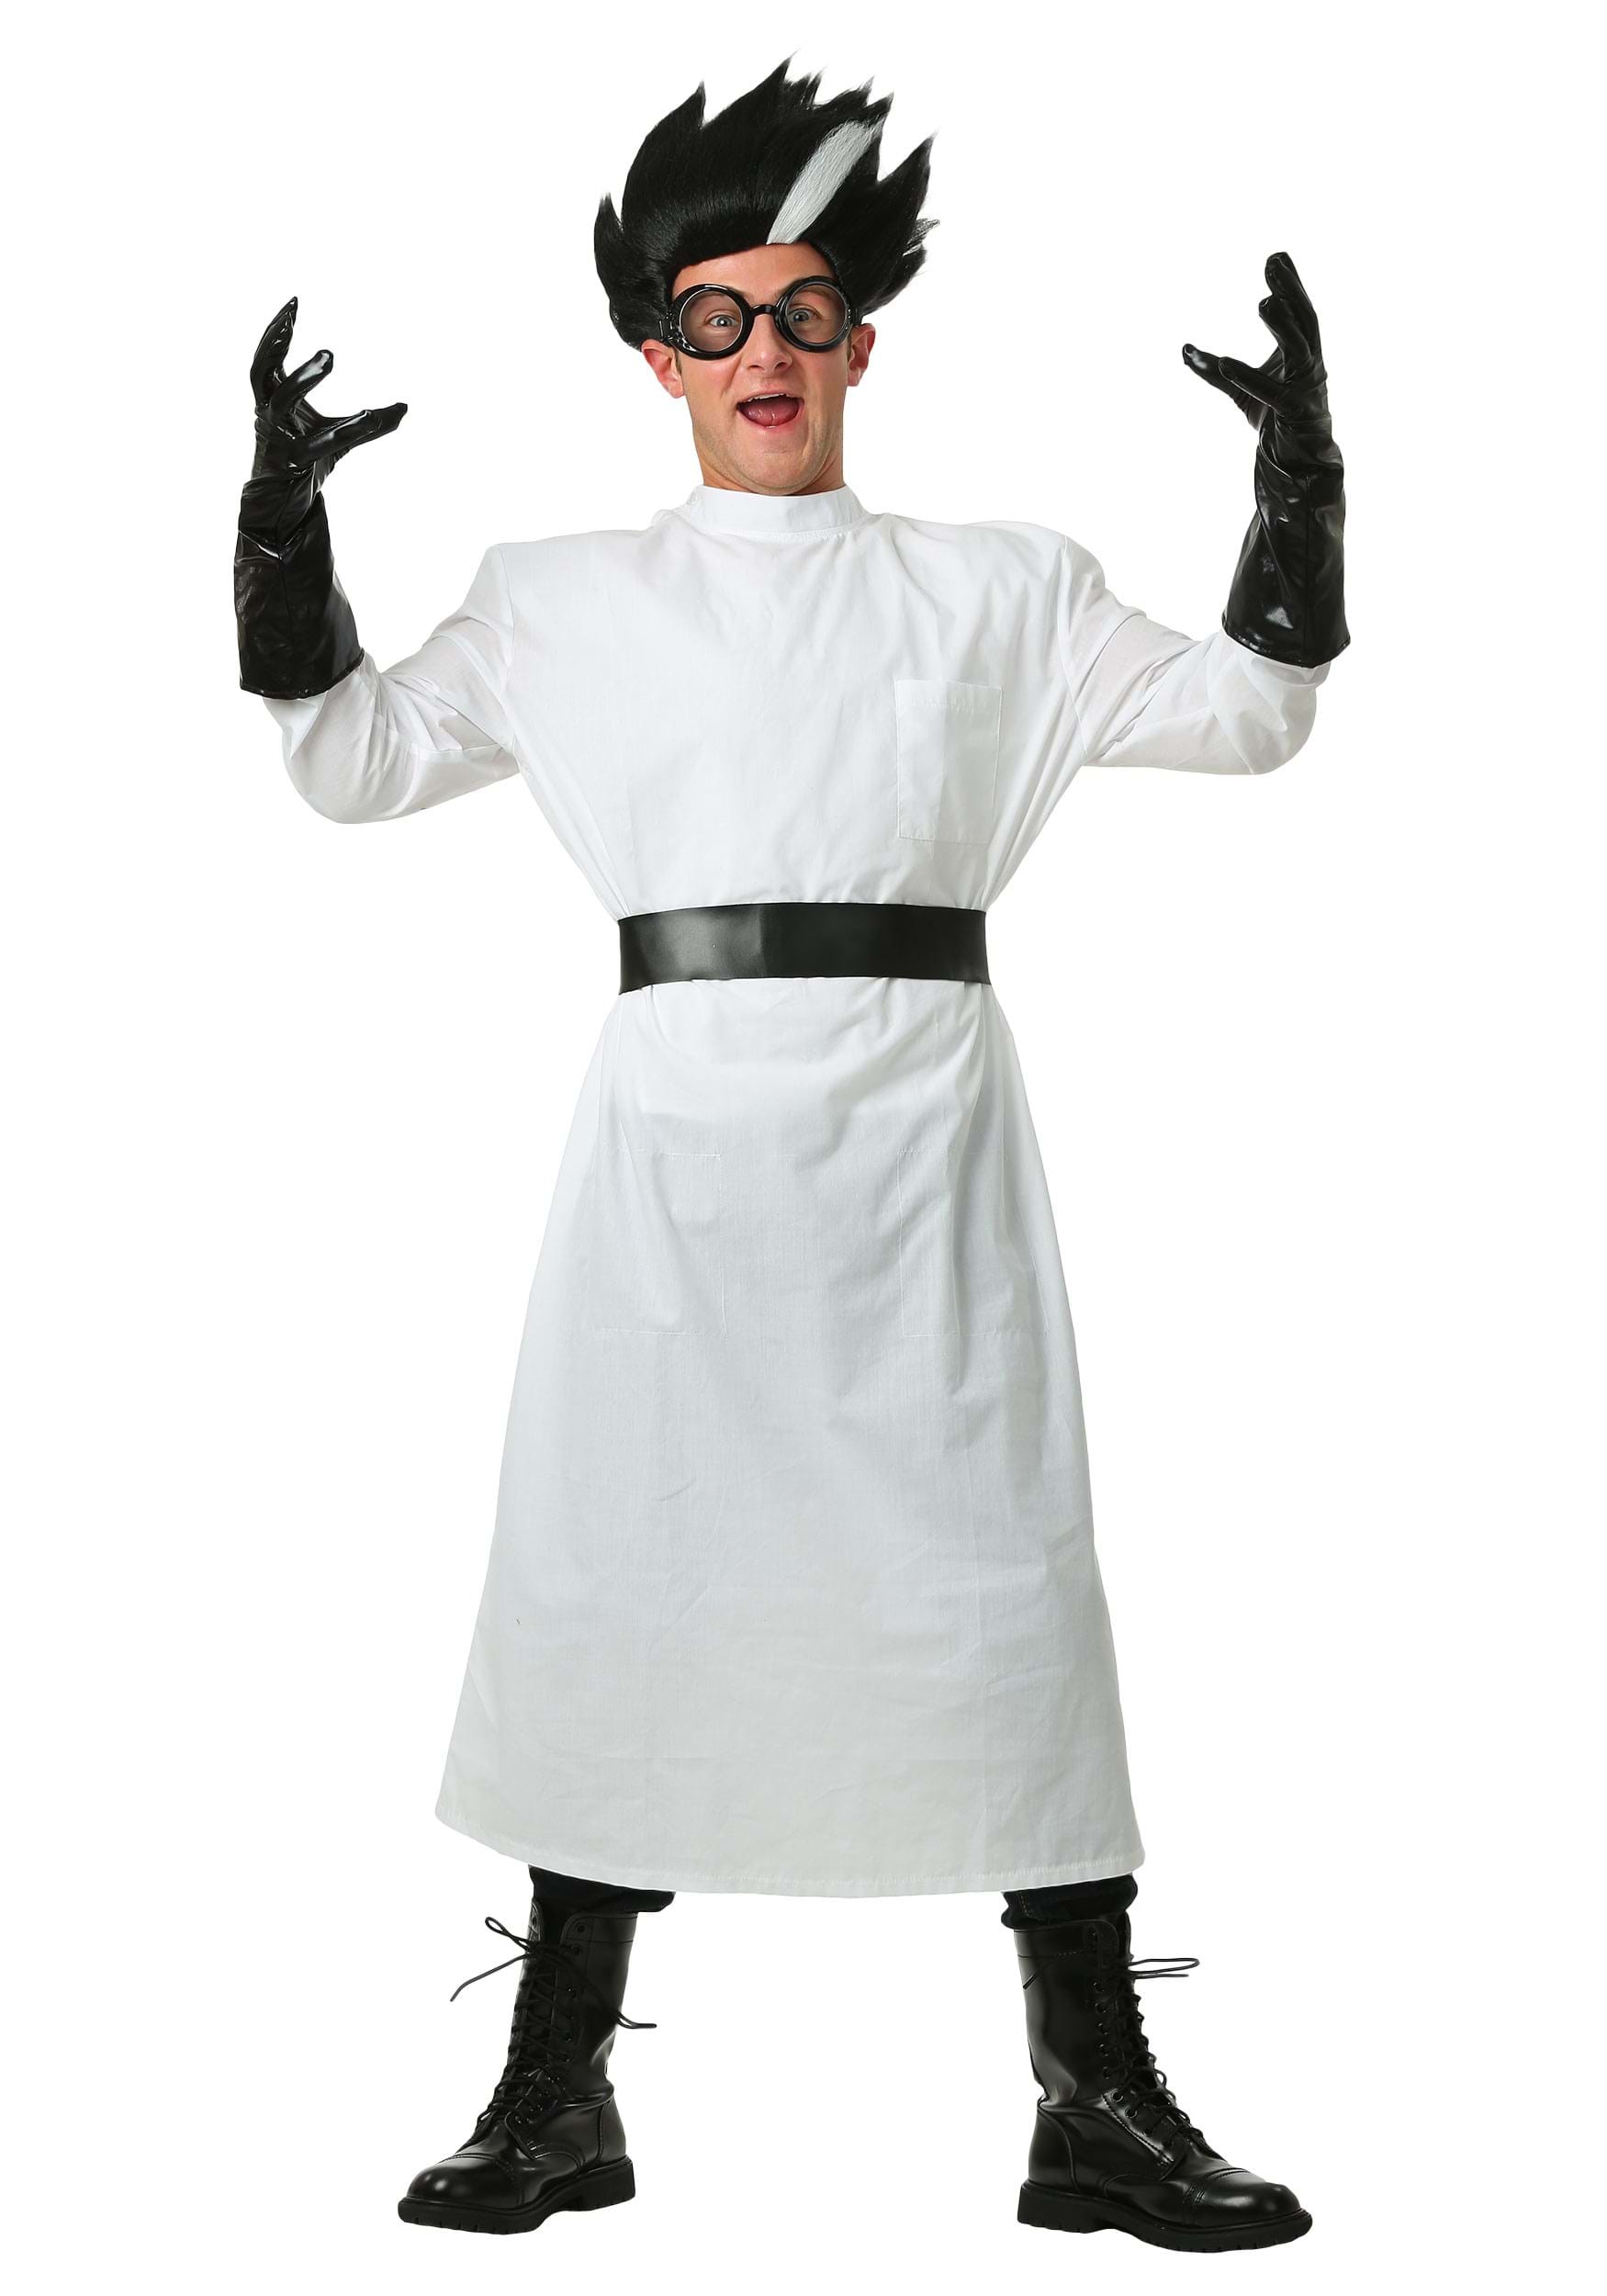 Plus Size Deluxe Mad Scientist Fancy Dress Costume For Adults